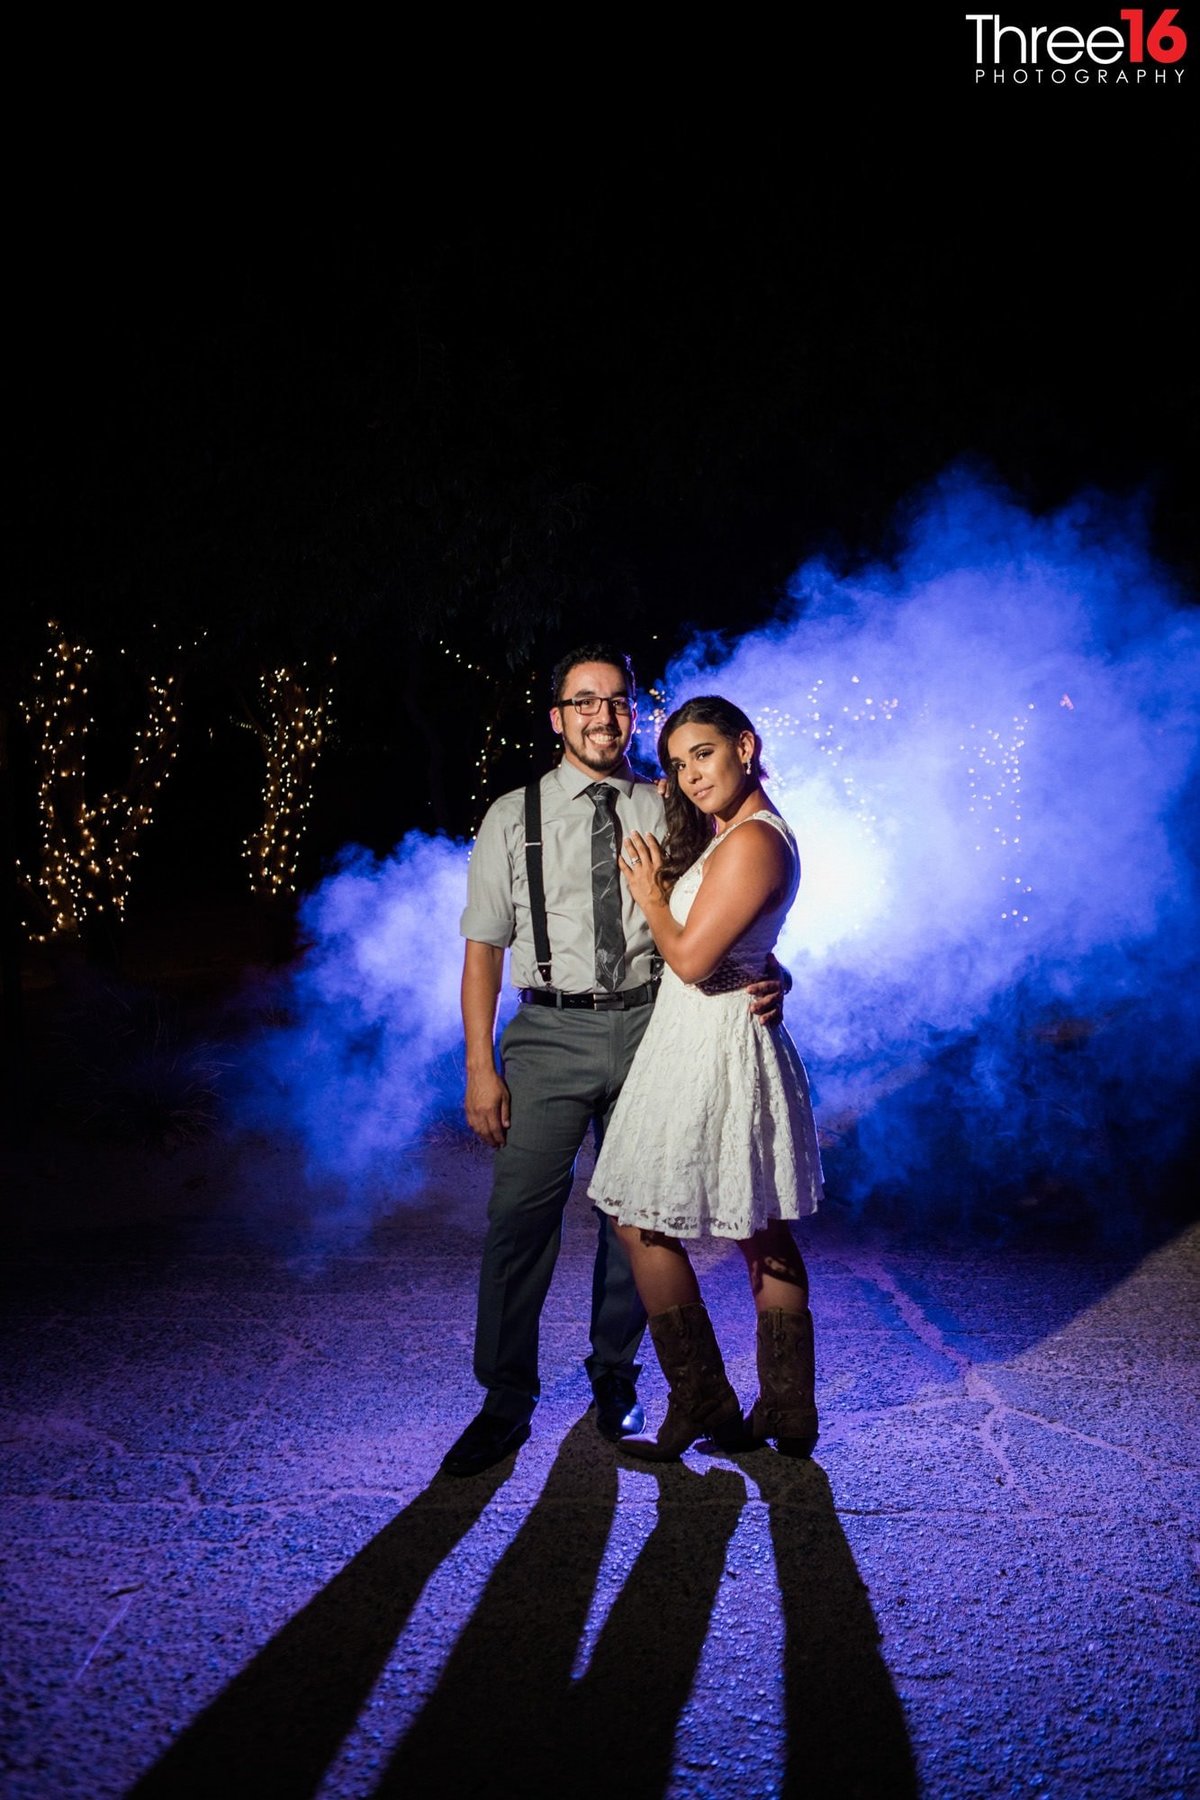 Night shot of couple with blue background